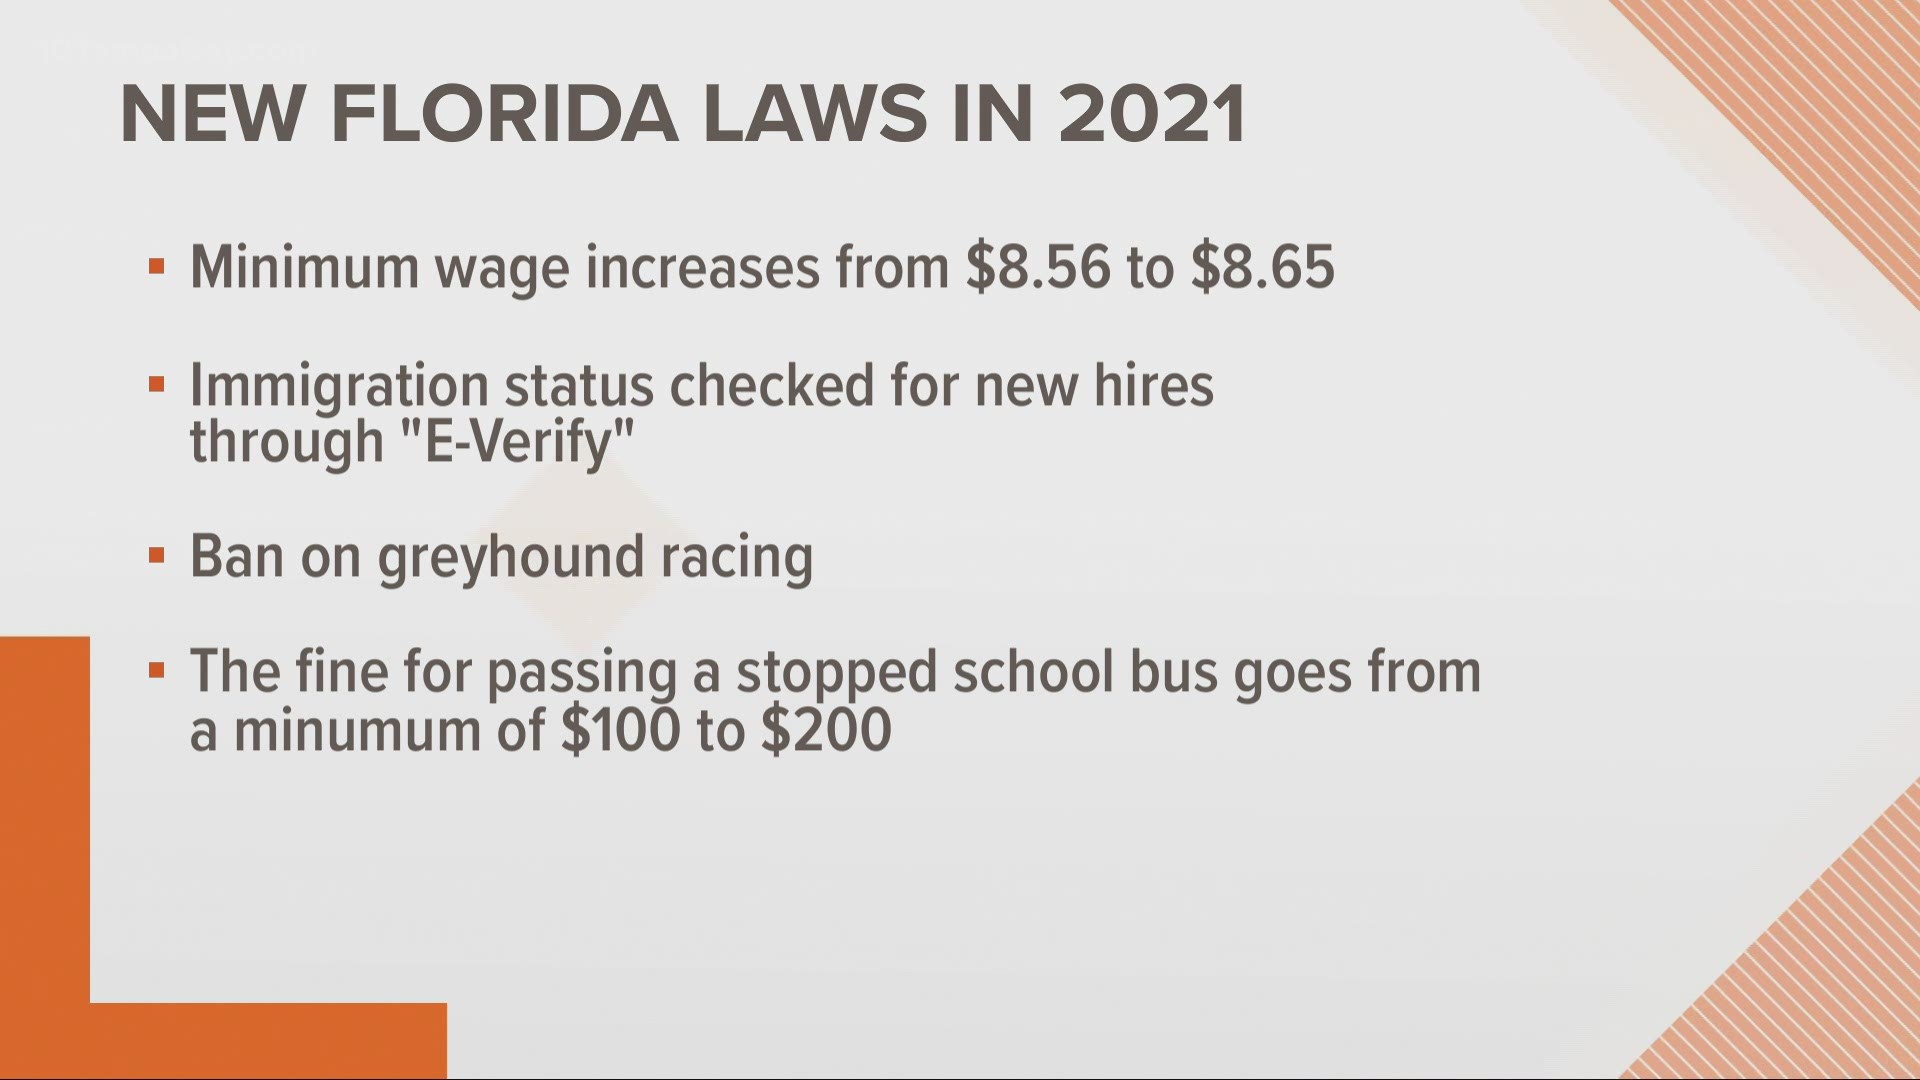 On New Year's Day, people living in the Sunshine State will see changes to minimum wage, greyhound racing, and school bus safety.